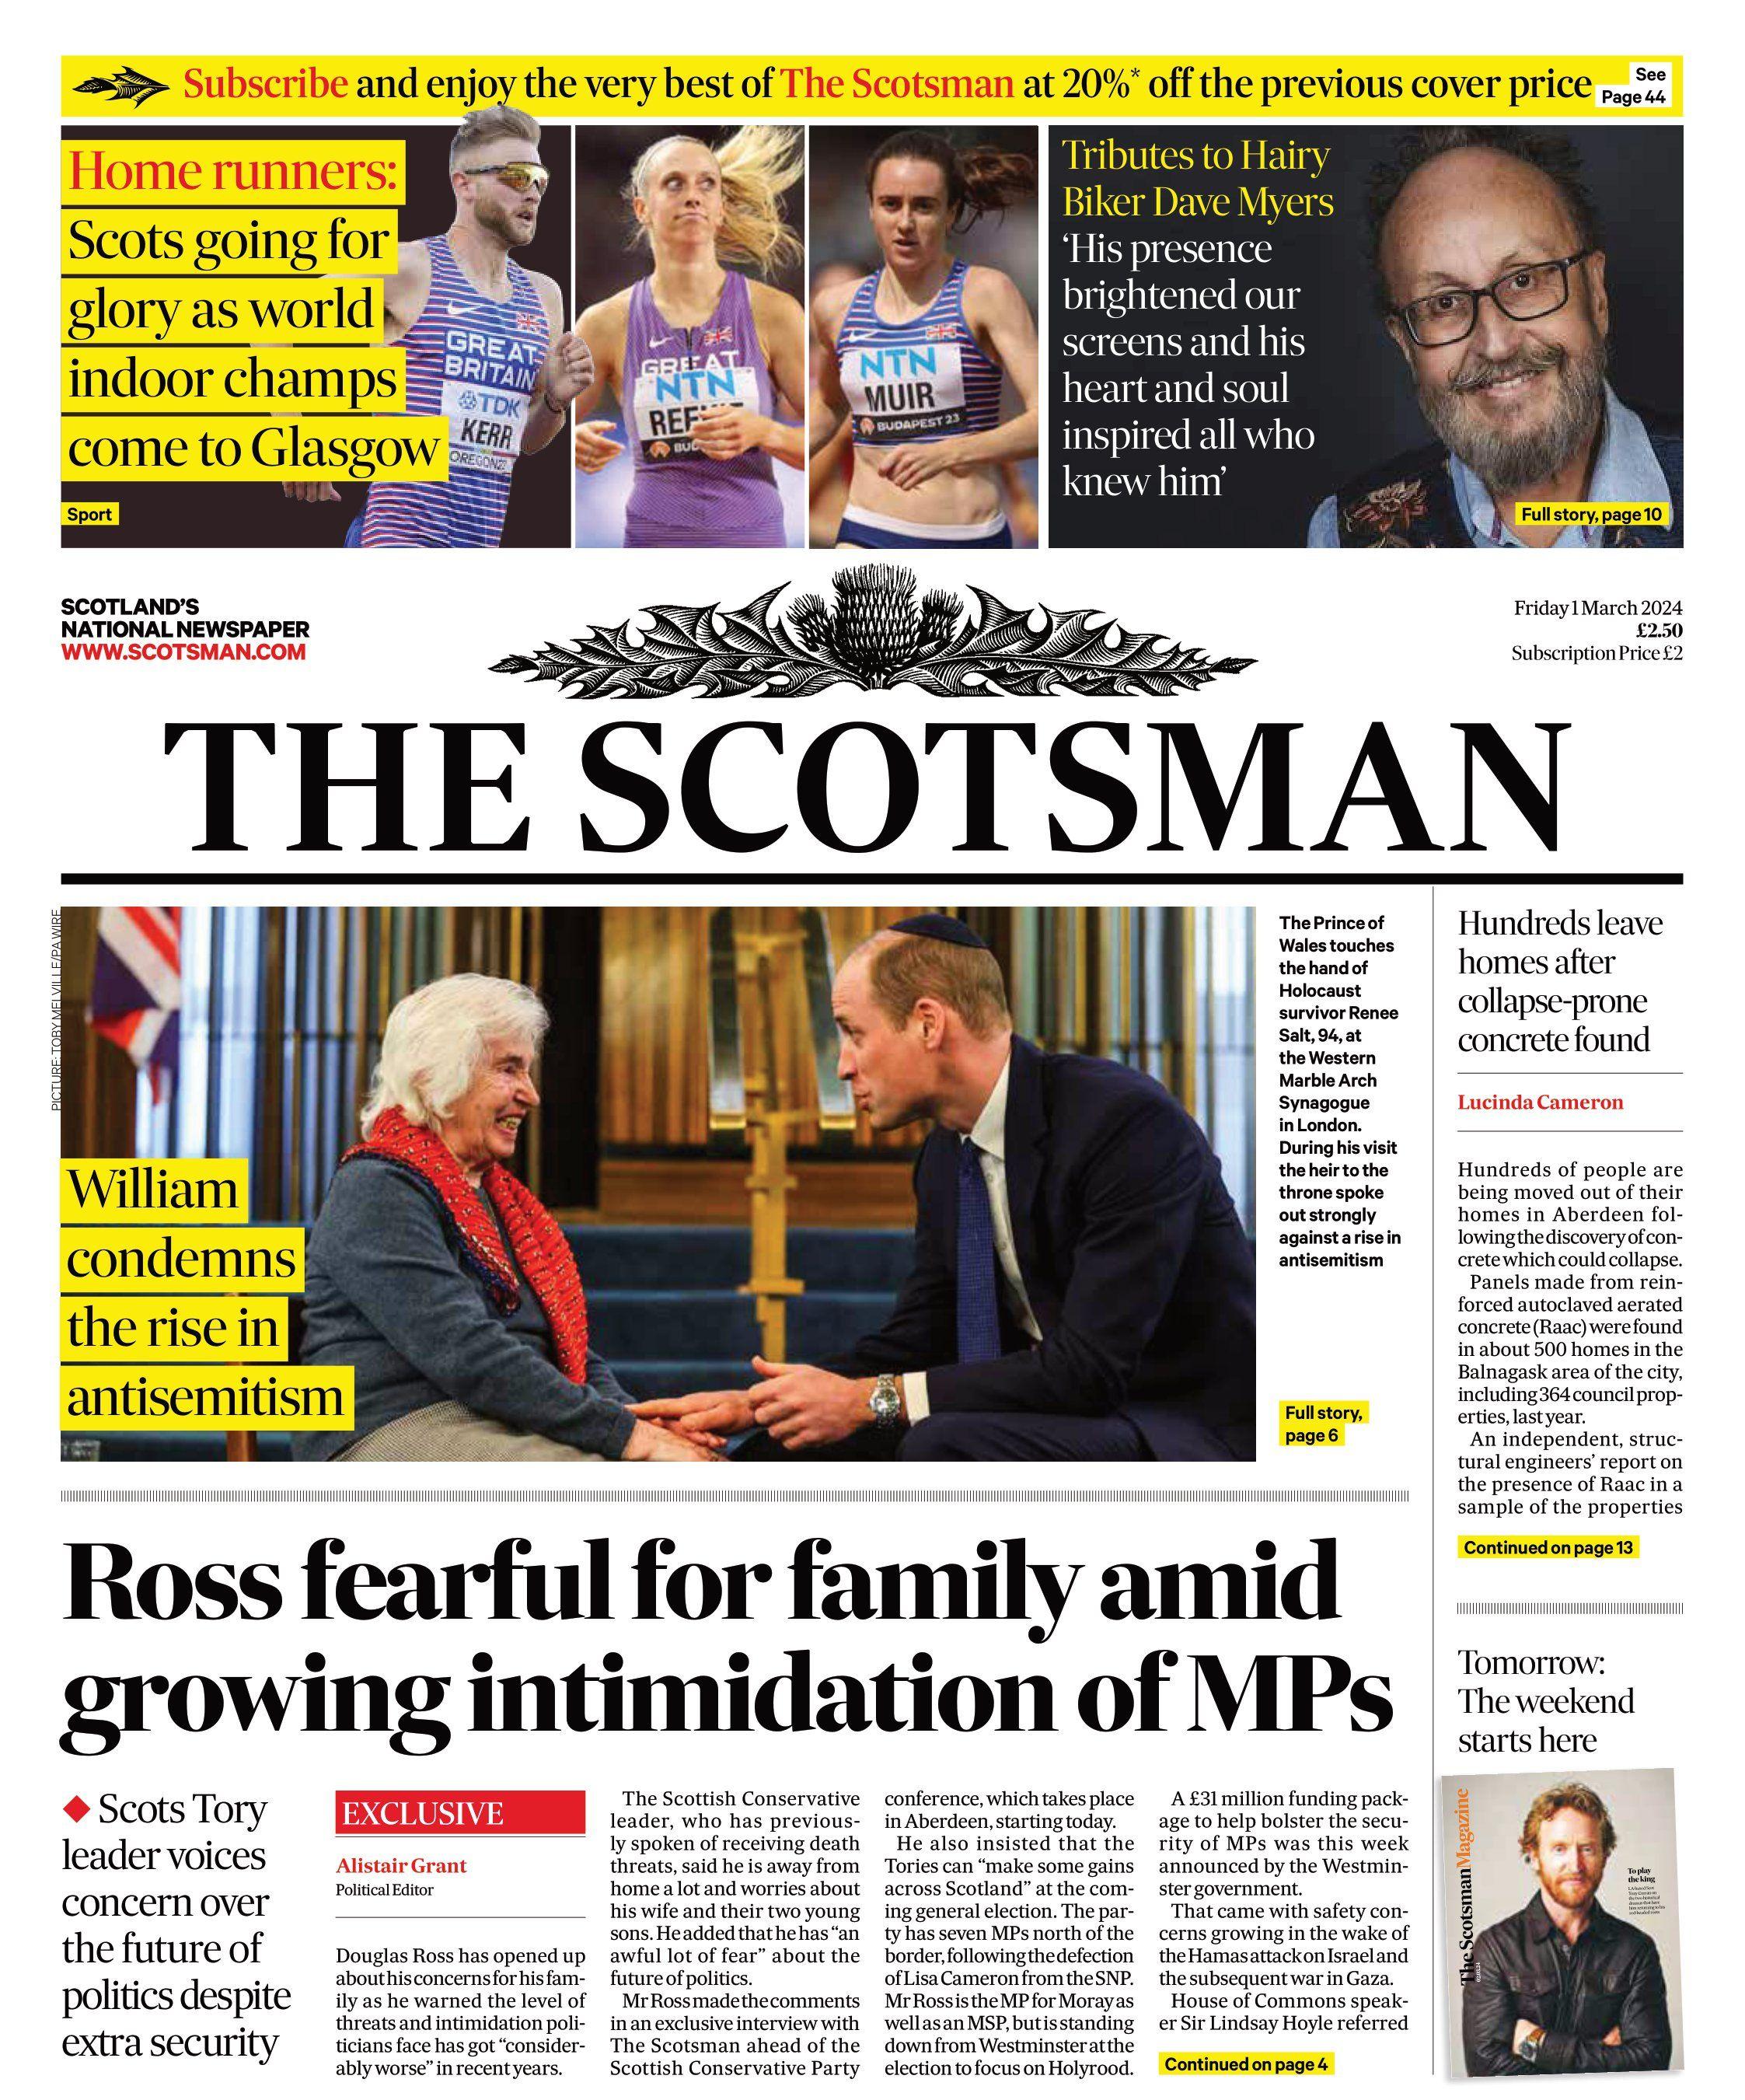 scotland's papers: calls for emma inquiry and ross fears for family